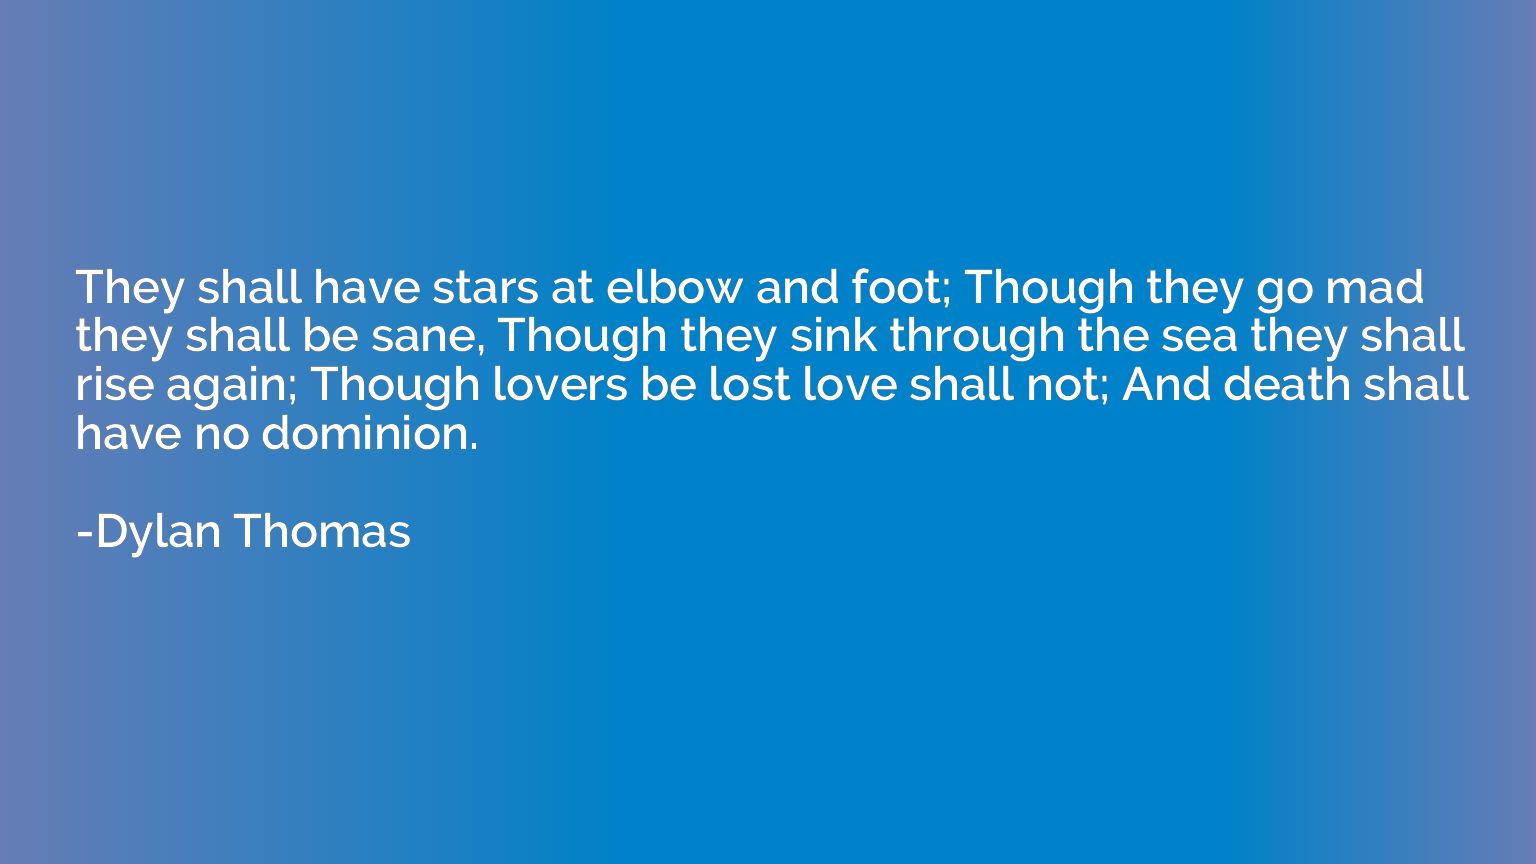 They shall have stars at elbow and foot; Though they go mad 